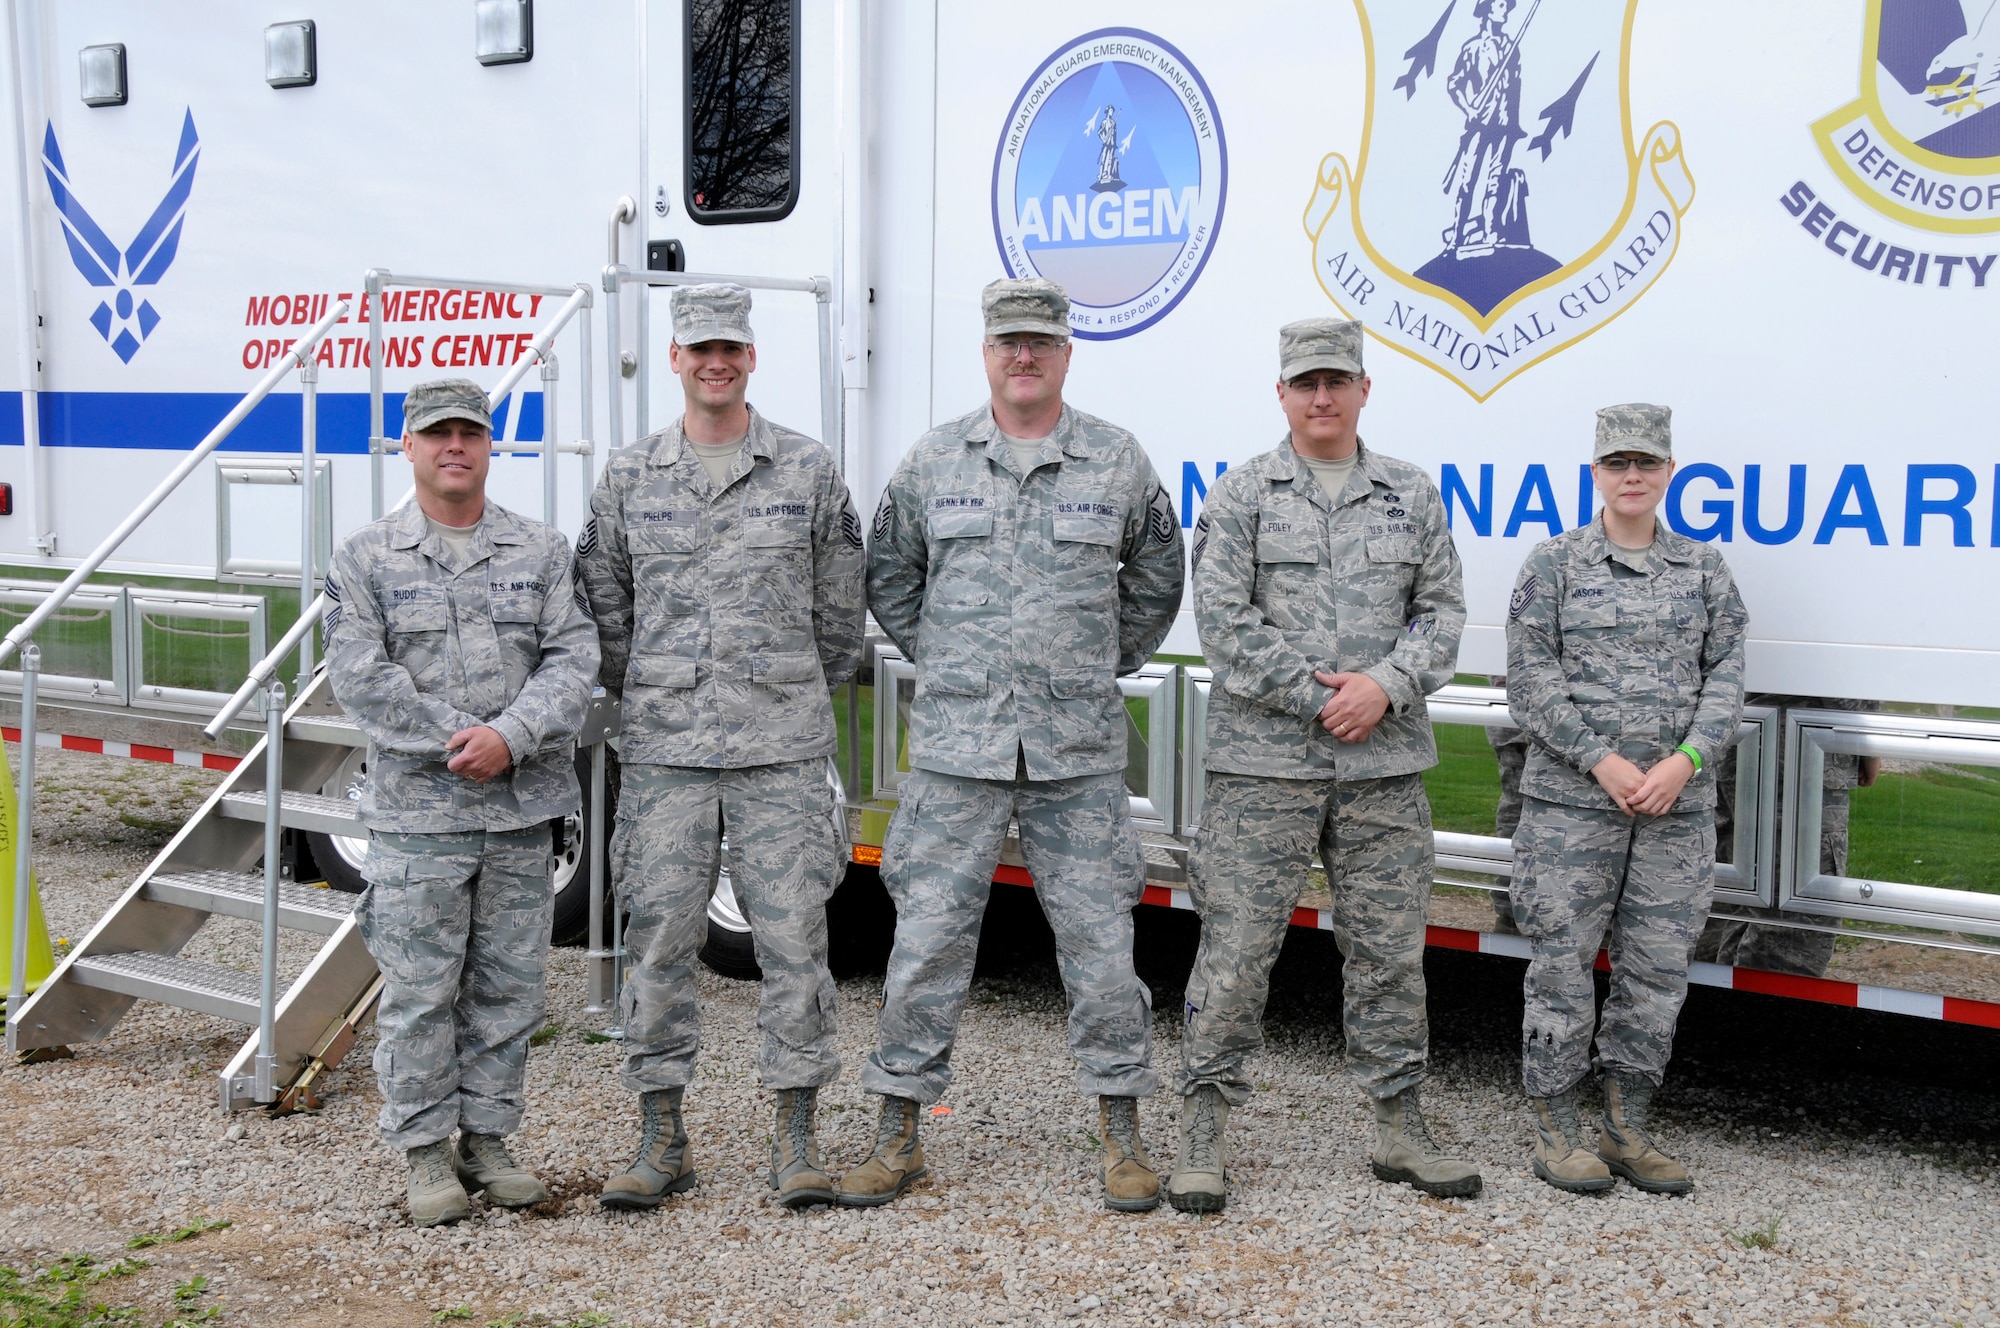 Emergency Management and Communications personnel from the 182nd Airlift Wing pose with their Mobile Emergency Operations Center (MEOC) vehicle following the conclusion of SIMCOM 2014 at Sunnyview Expo Center in Oshkosh, Wis. May 15, 2014. SIMCOM (State Interoperable Mobile Communications) is a functional exercise designed to test the interoperability of federal, state, county, tribal, volunteer, private organizations and defense communications and data sharing. Air National Guard photo by Tech. Sgt. Todd Pendleton (Released)